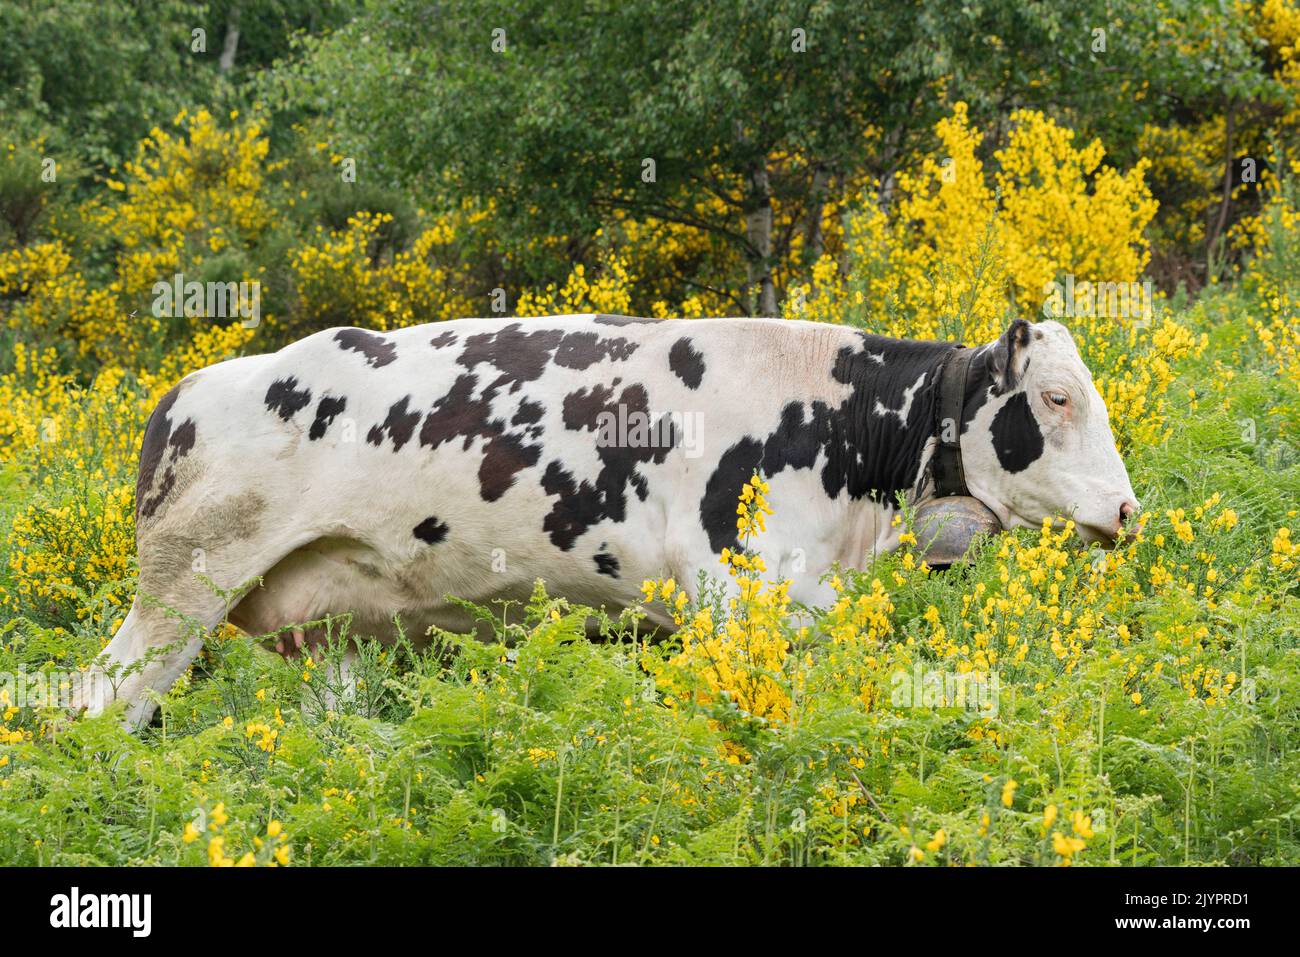 Holstein Friesian cow, Valcolla, former municipality in the district of Lugano in the canton of Ticino, Switzerland Stock Photo